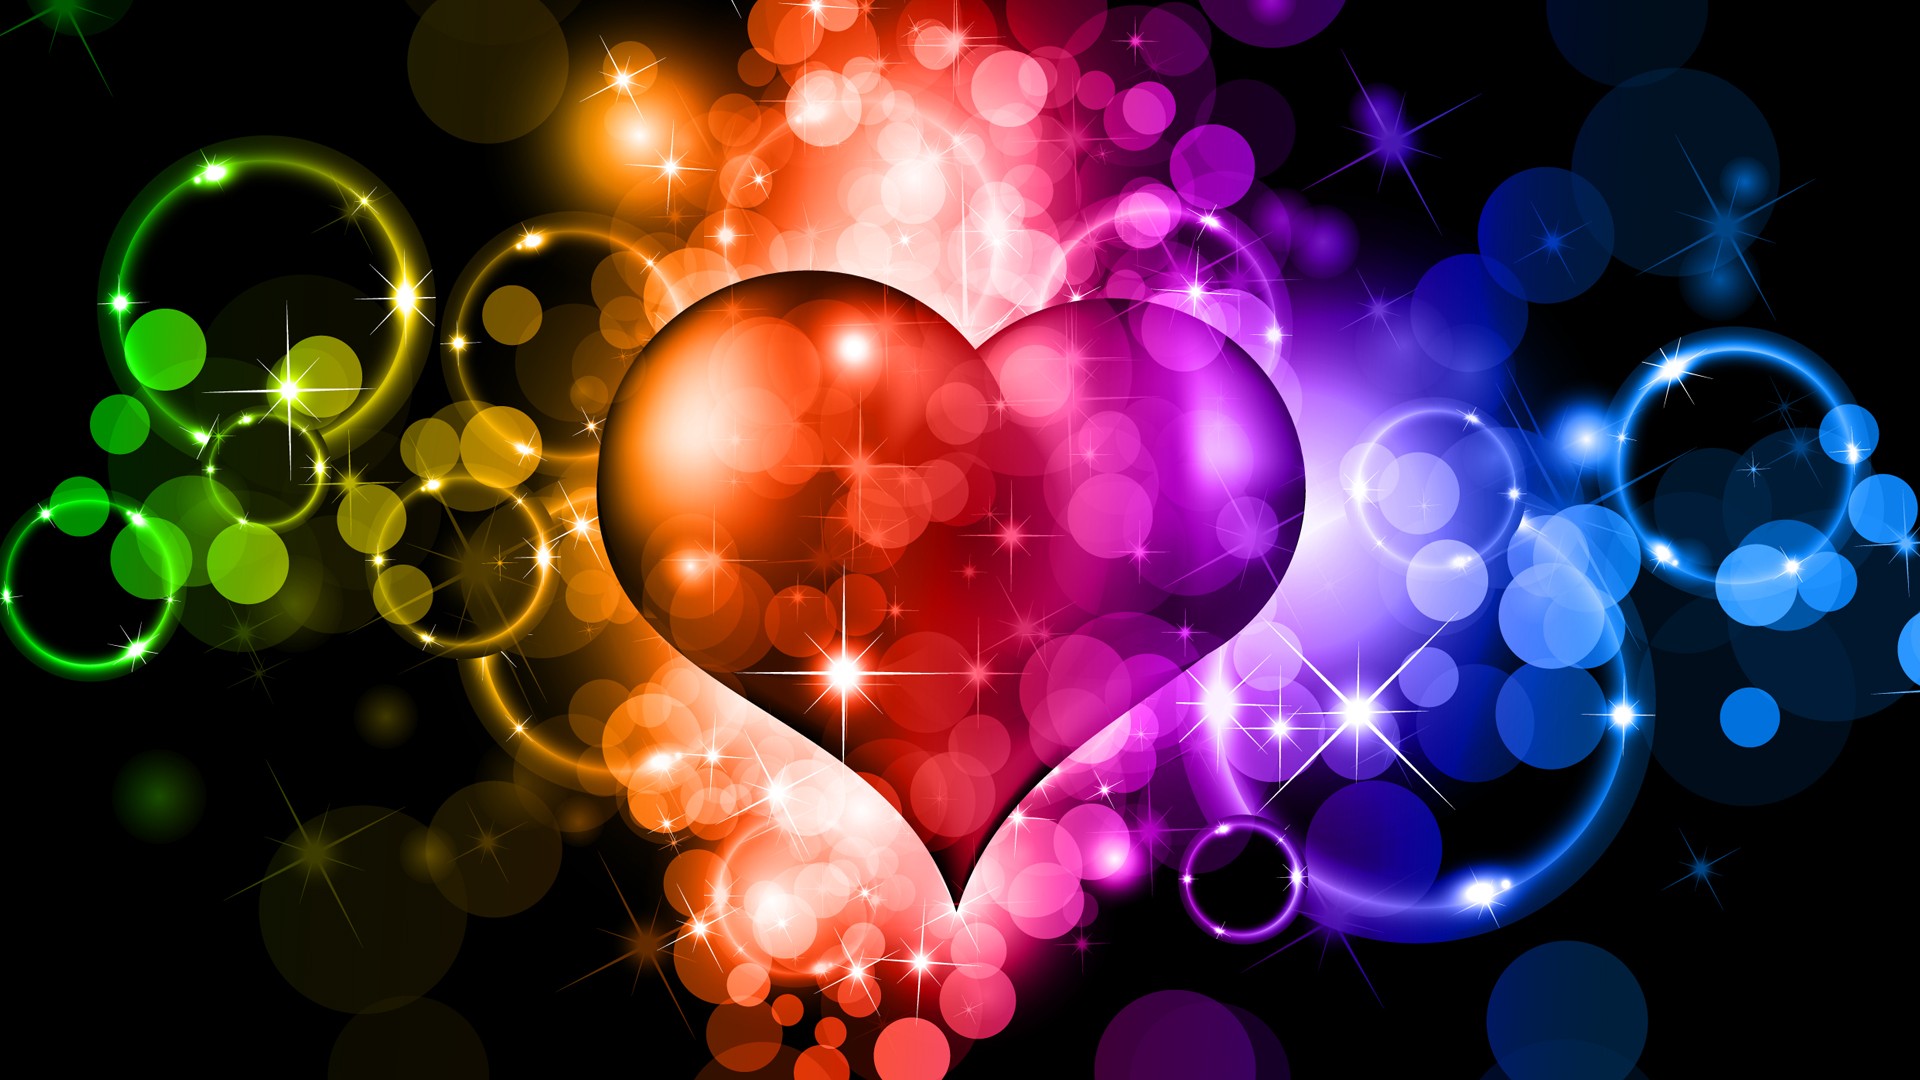 heart, Heart shaped, Colorful, Graphic design Wallpapers HD / Desktop